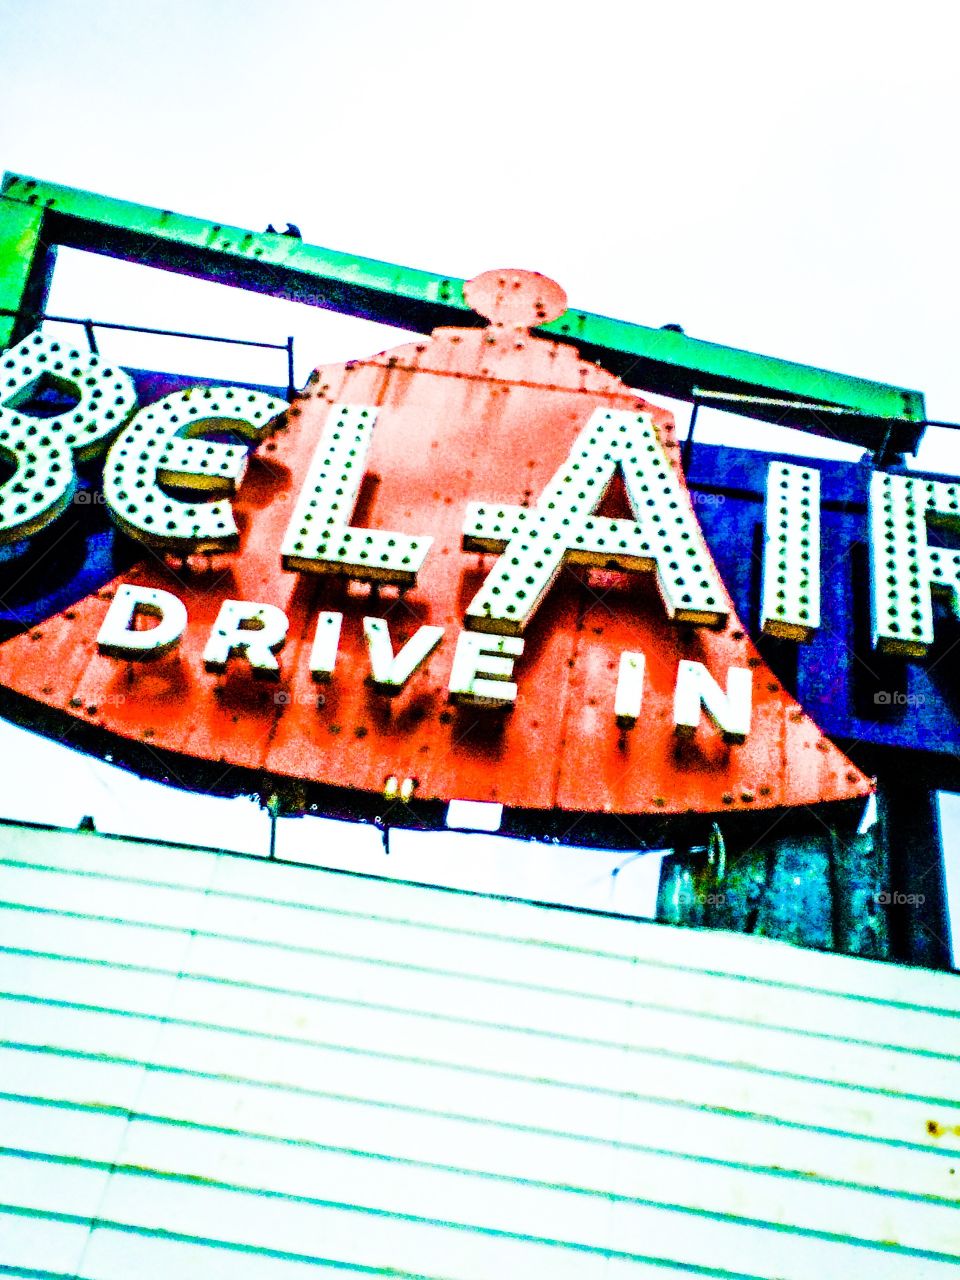 BelAir Drive In Marquee. Vintage drive-in movie theater marquee on Route 66 in Mitchell IL